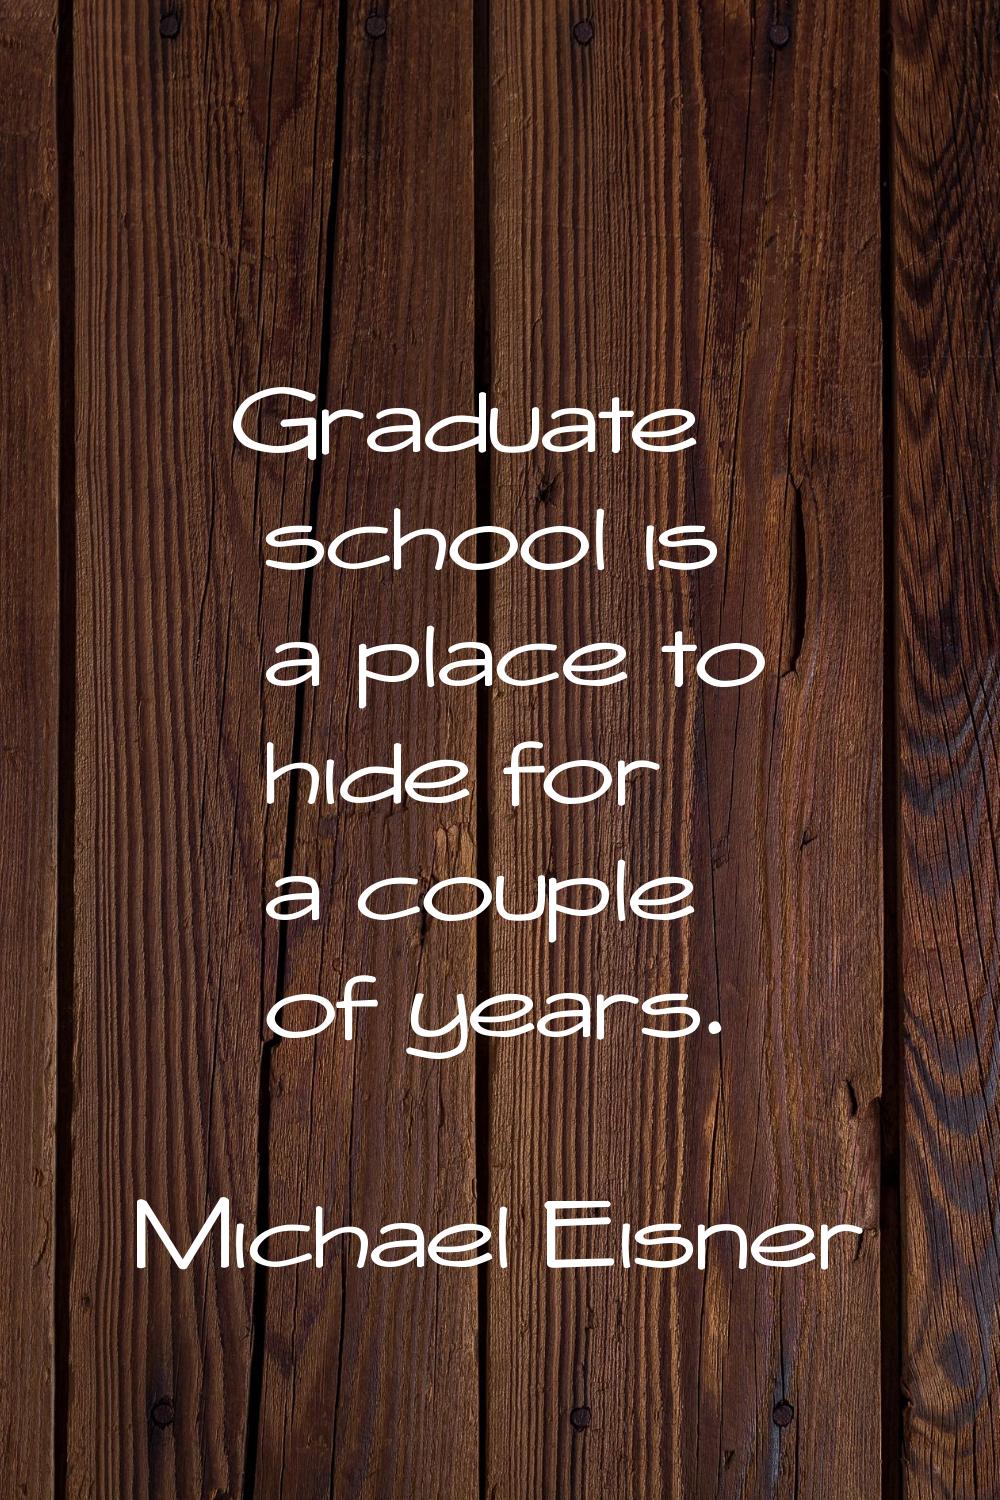 Graduate school is a place to hide for a couple of years.